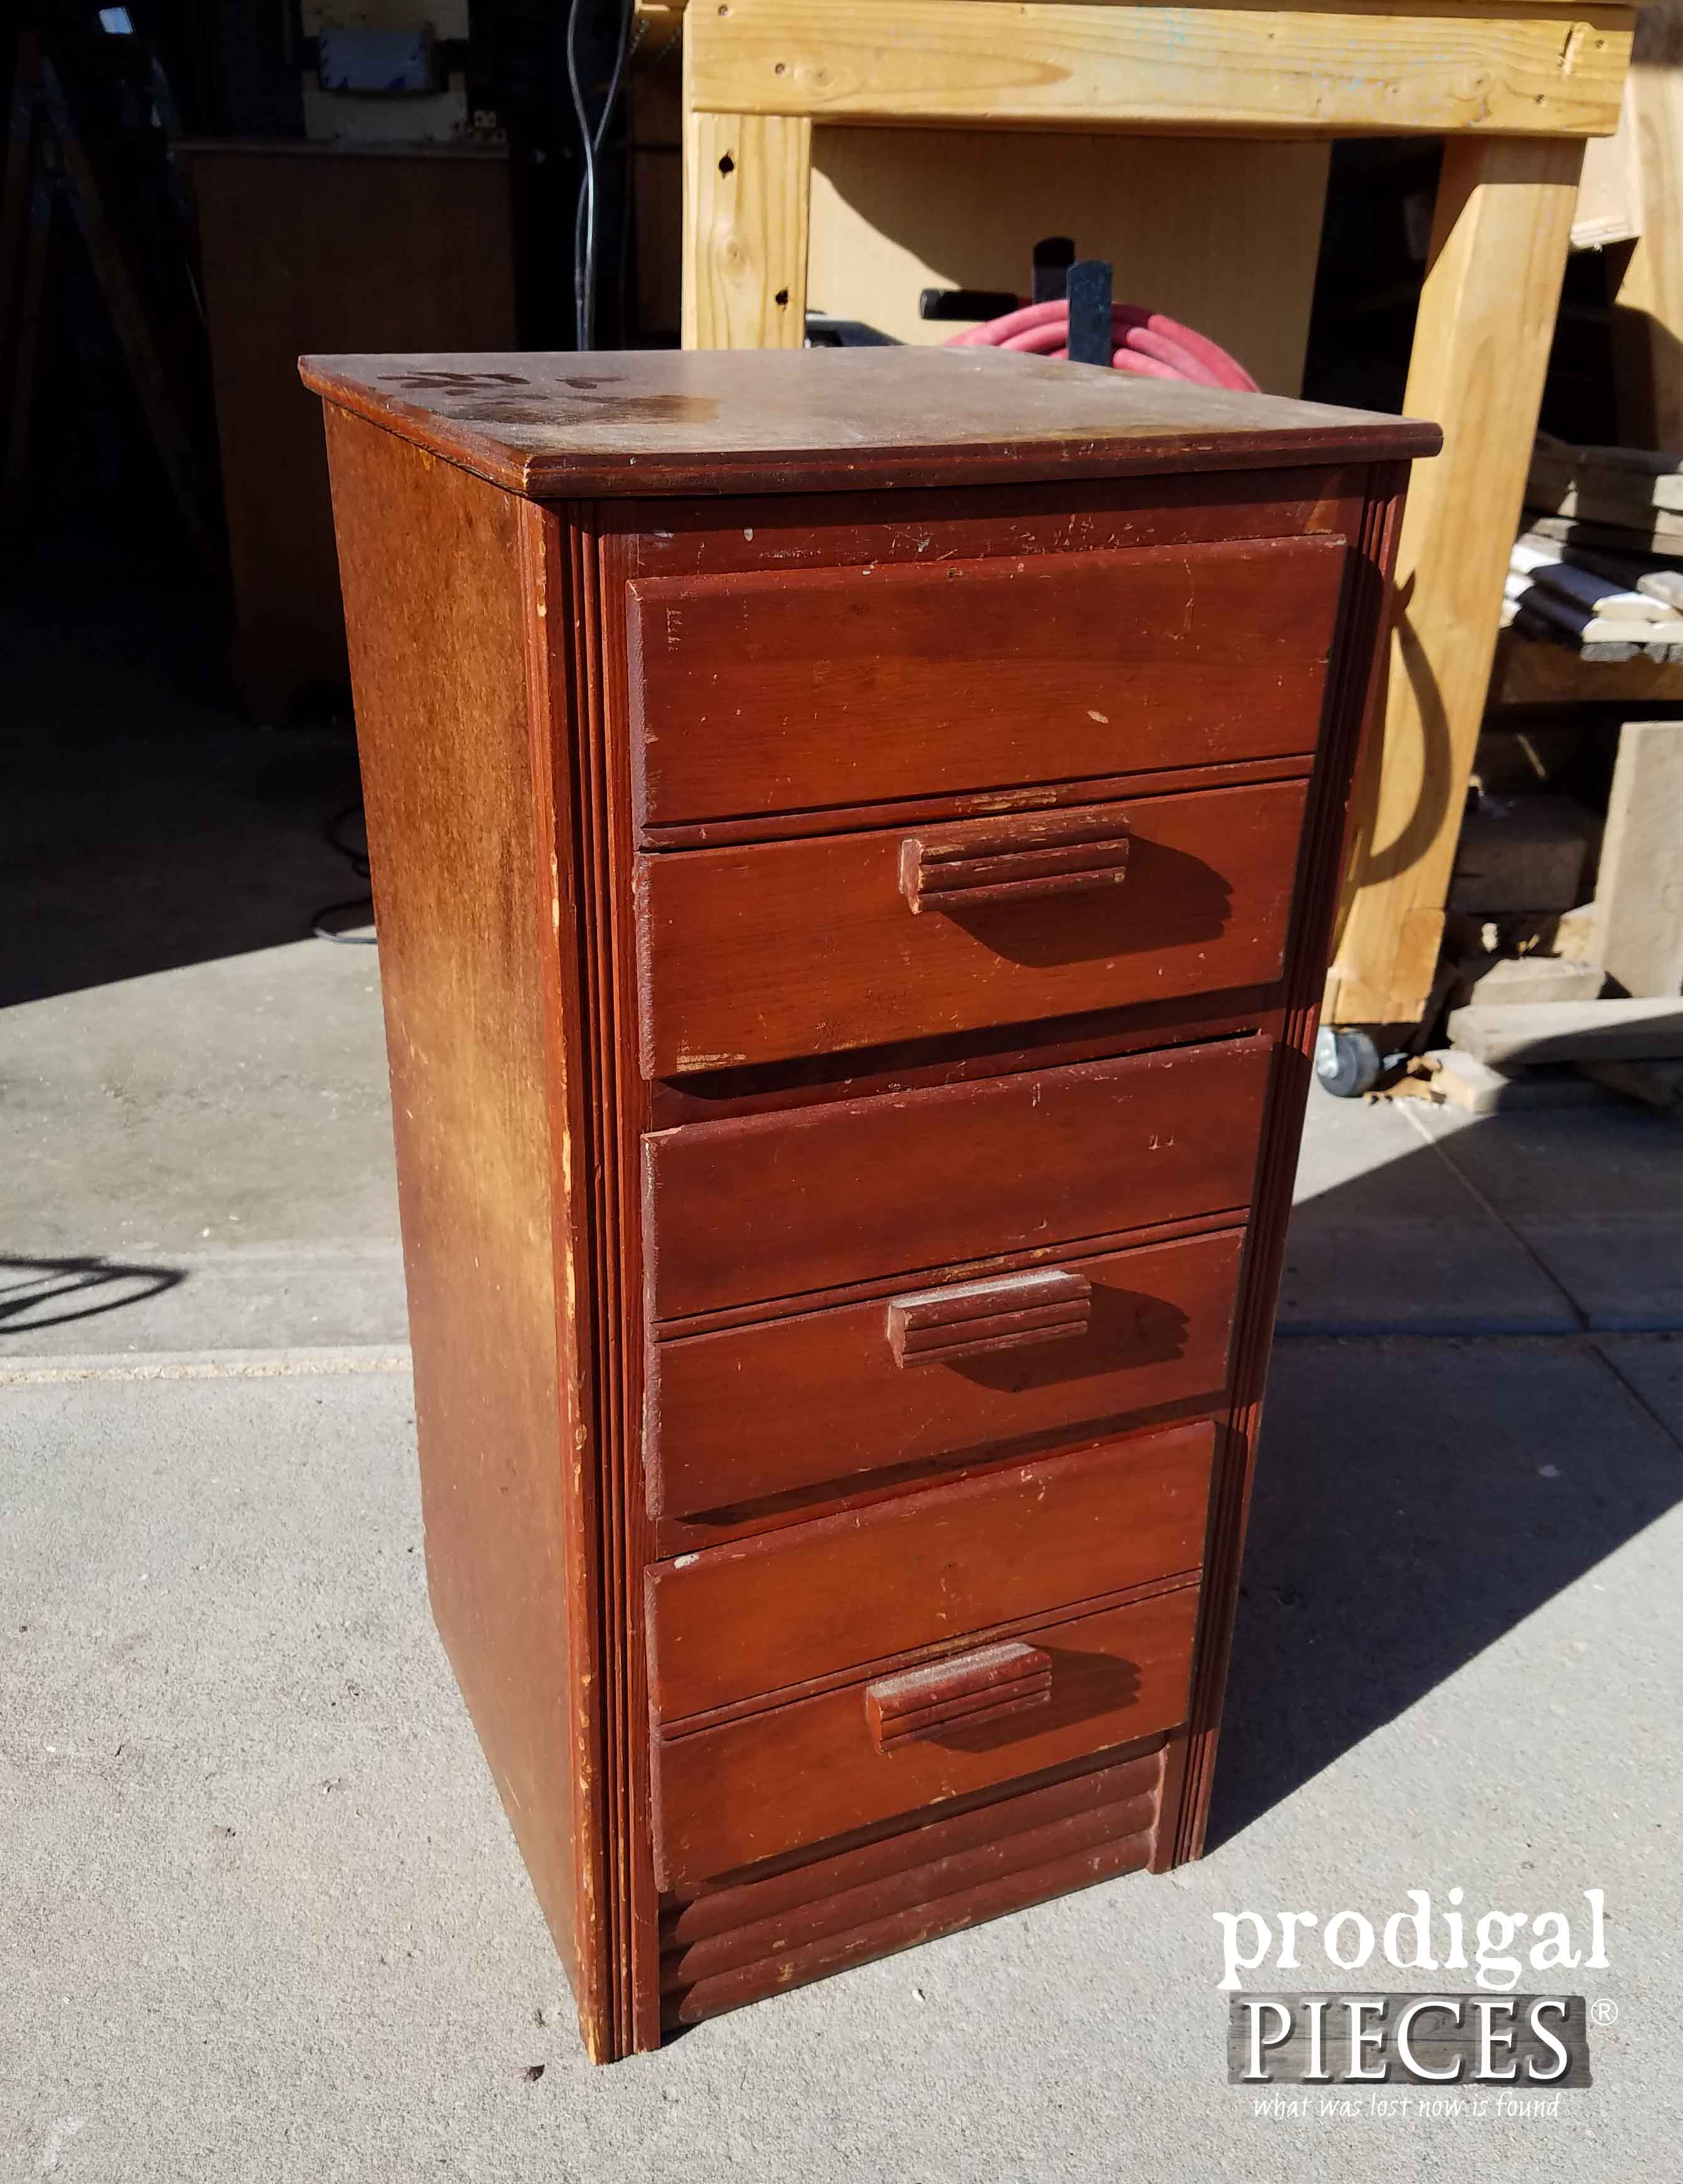 Filing Cabinet Before Makeover by Prodigal Pieces | prodigalpieces.com